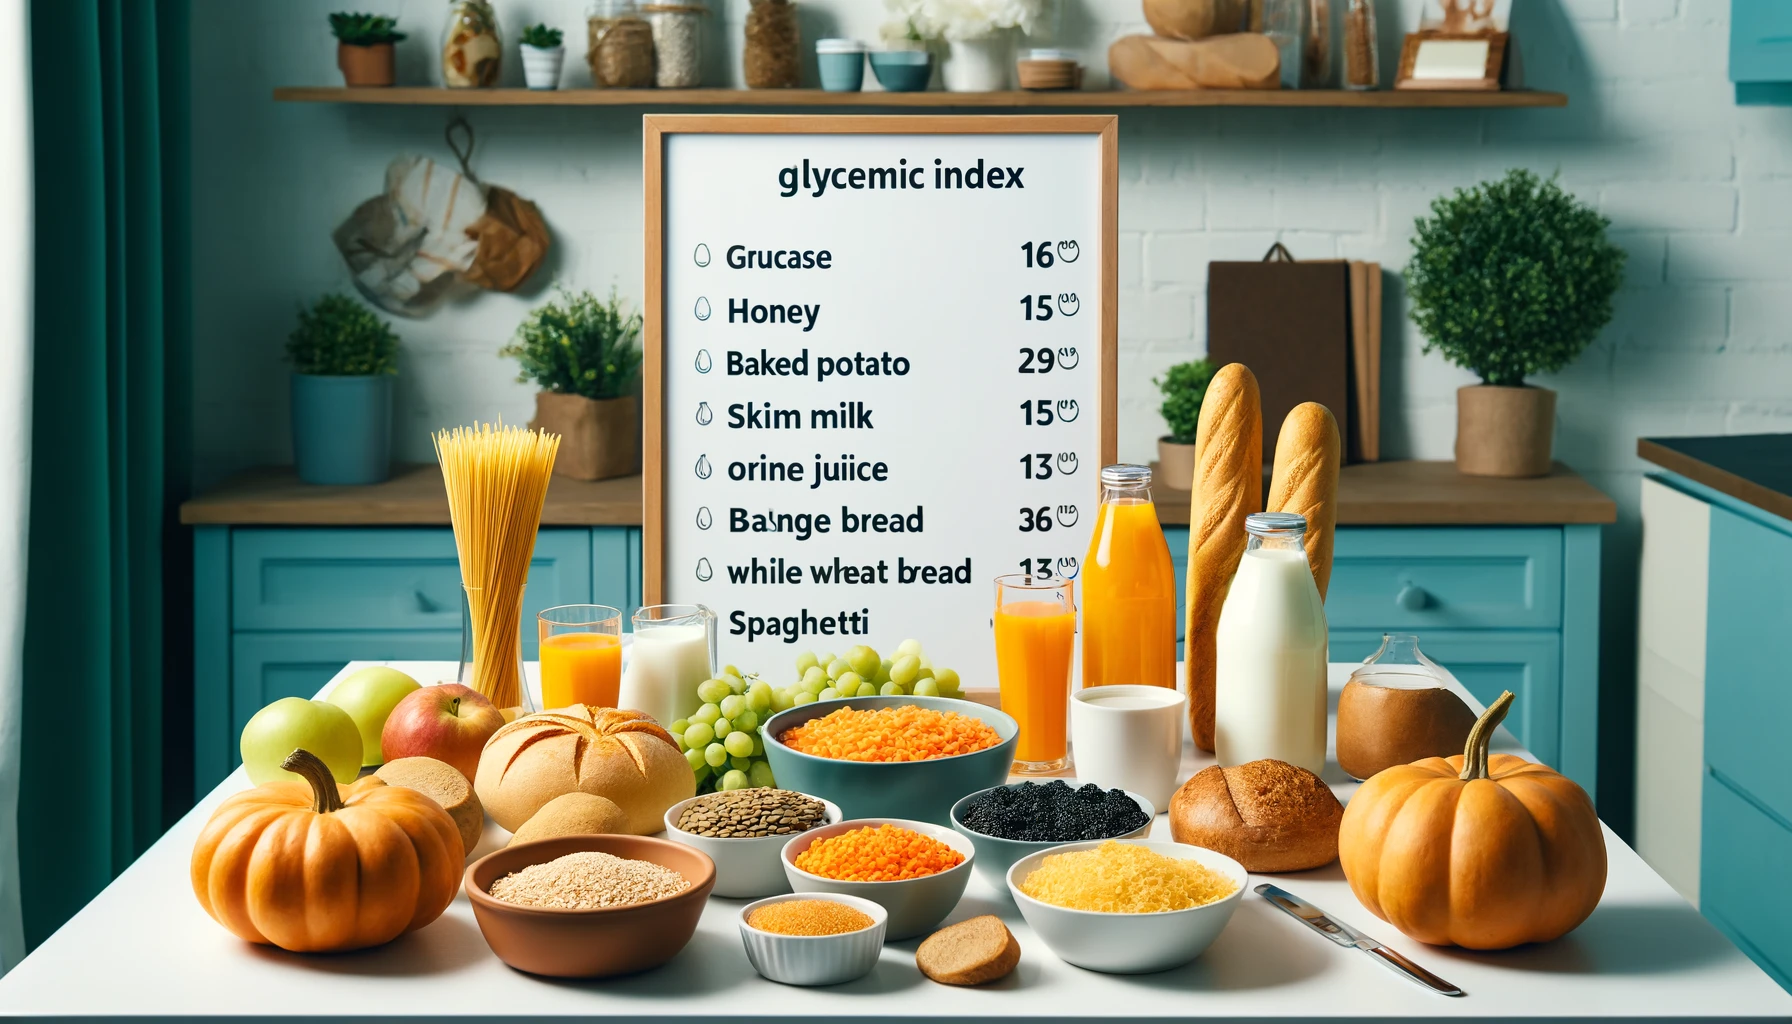 A well organized kitchen table with a variety of foods displayed each labeled with their glycemic index. The table includes glucose honey lentils etc